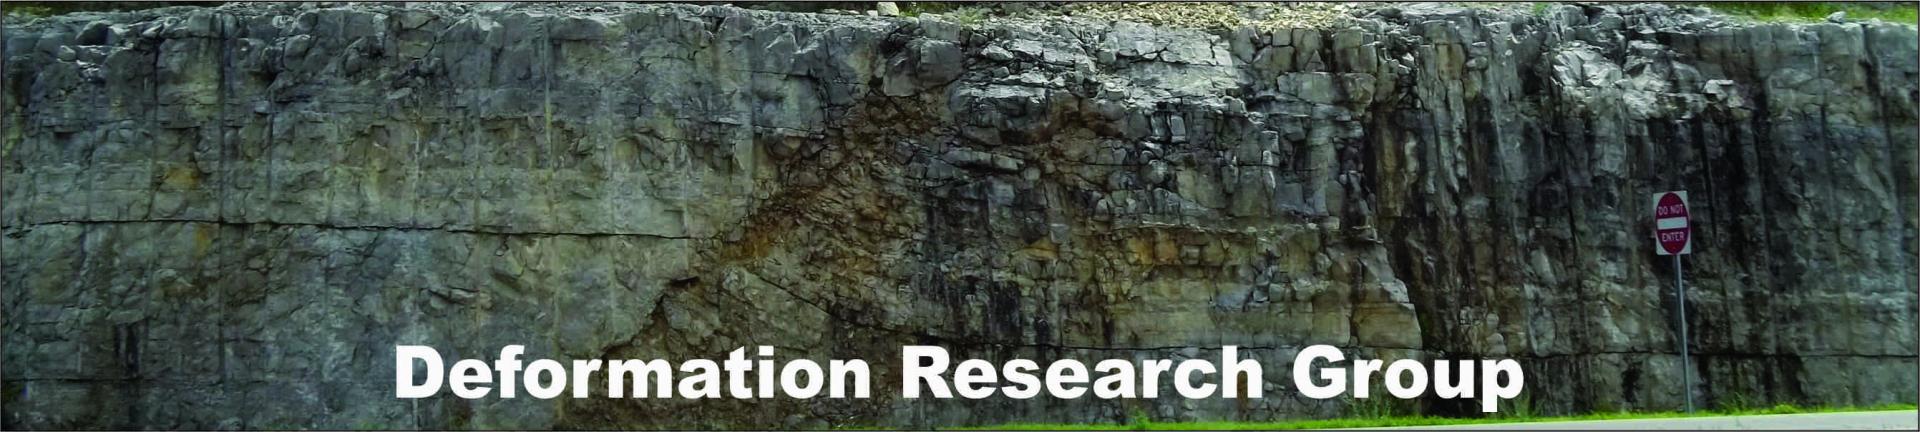 Deformation Research Group text over rock